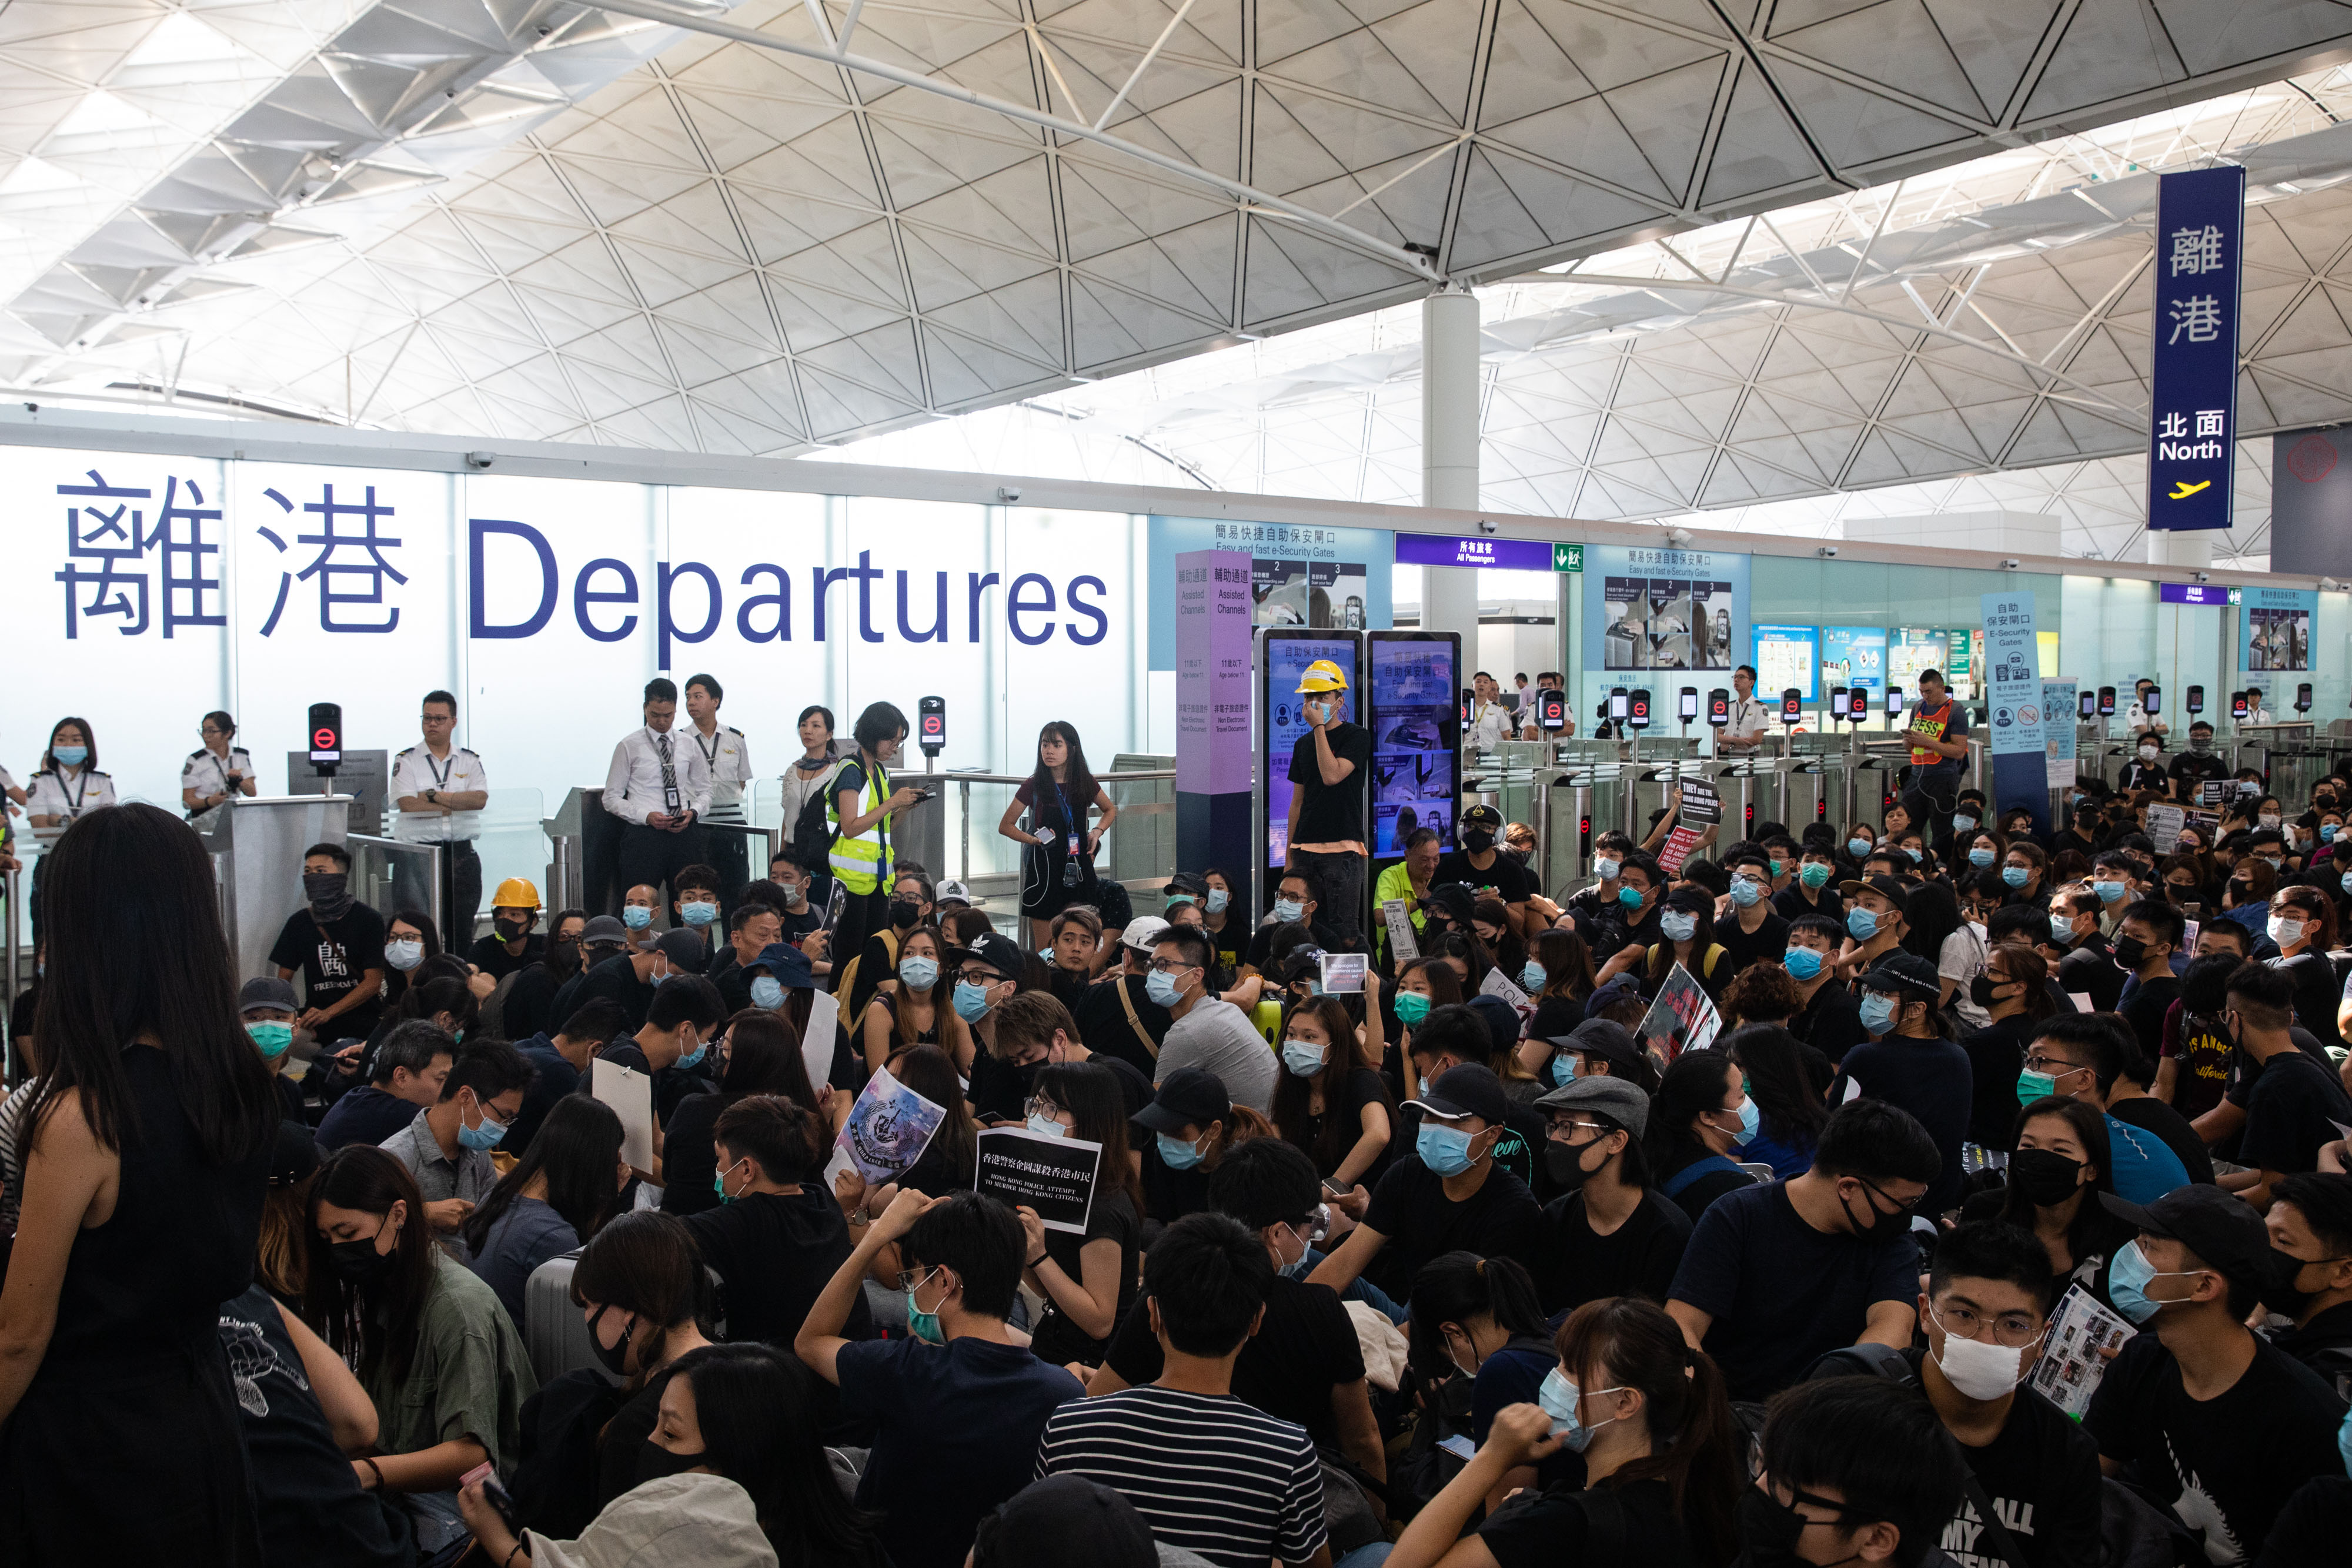 Demonstrators block the terminal one departures hall during a protest at the Hong Kong International Airport on Aug. 13.